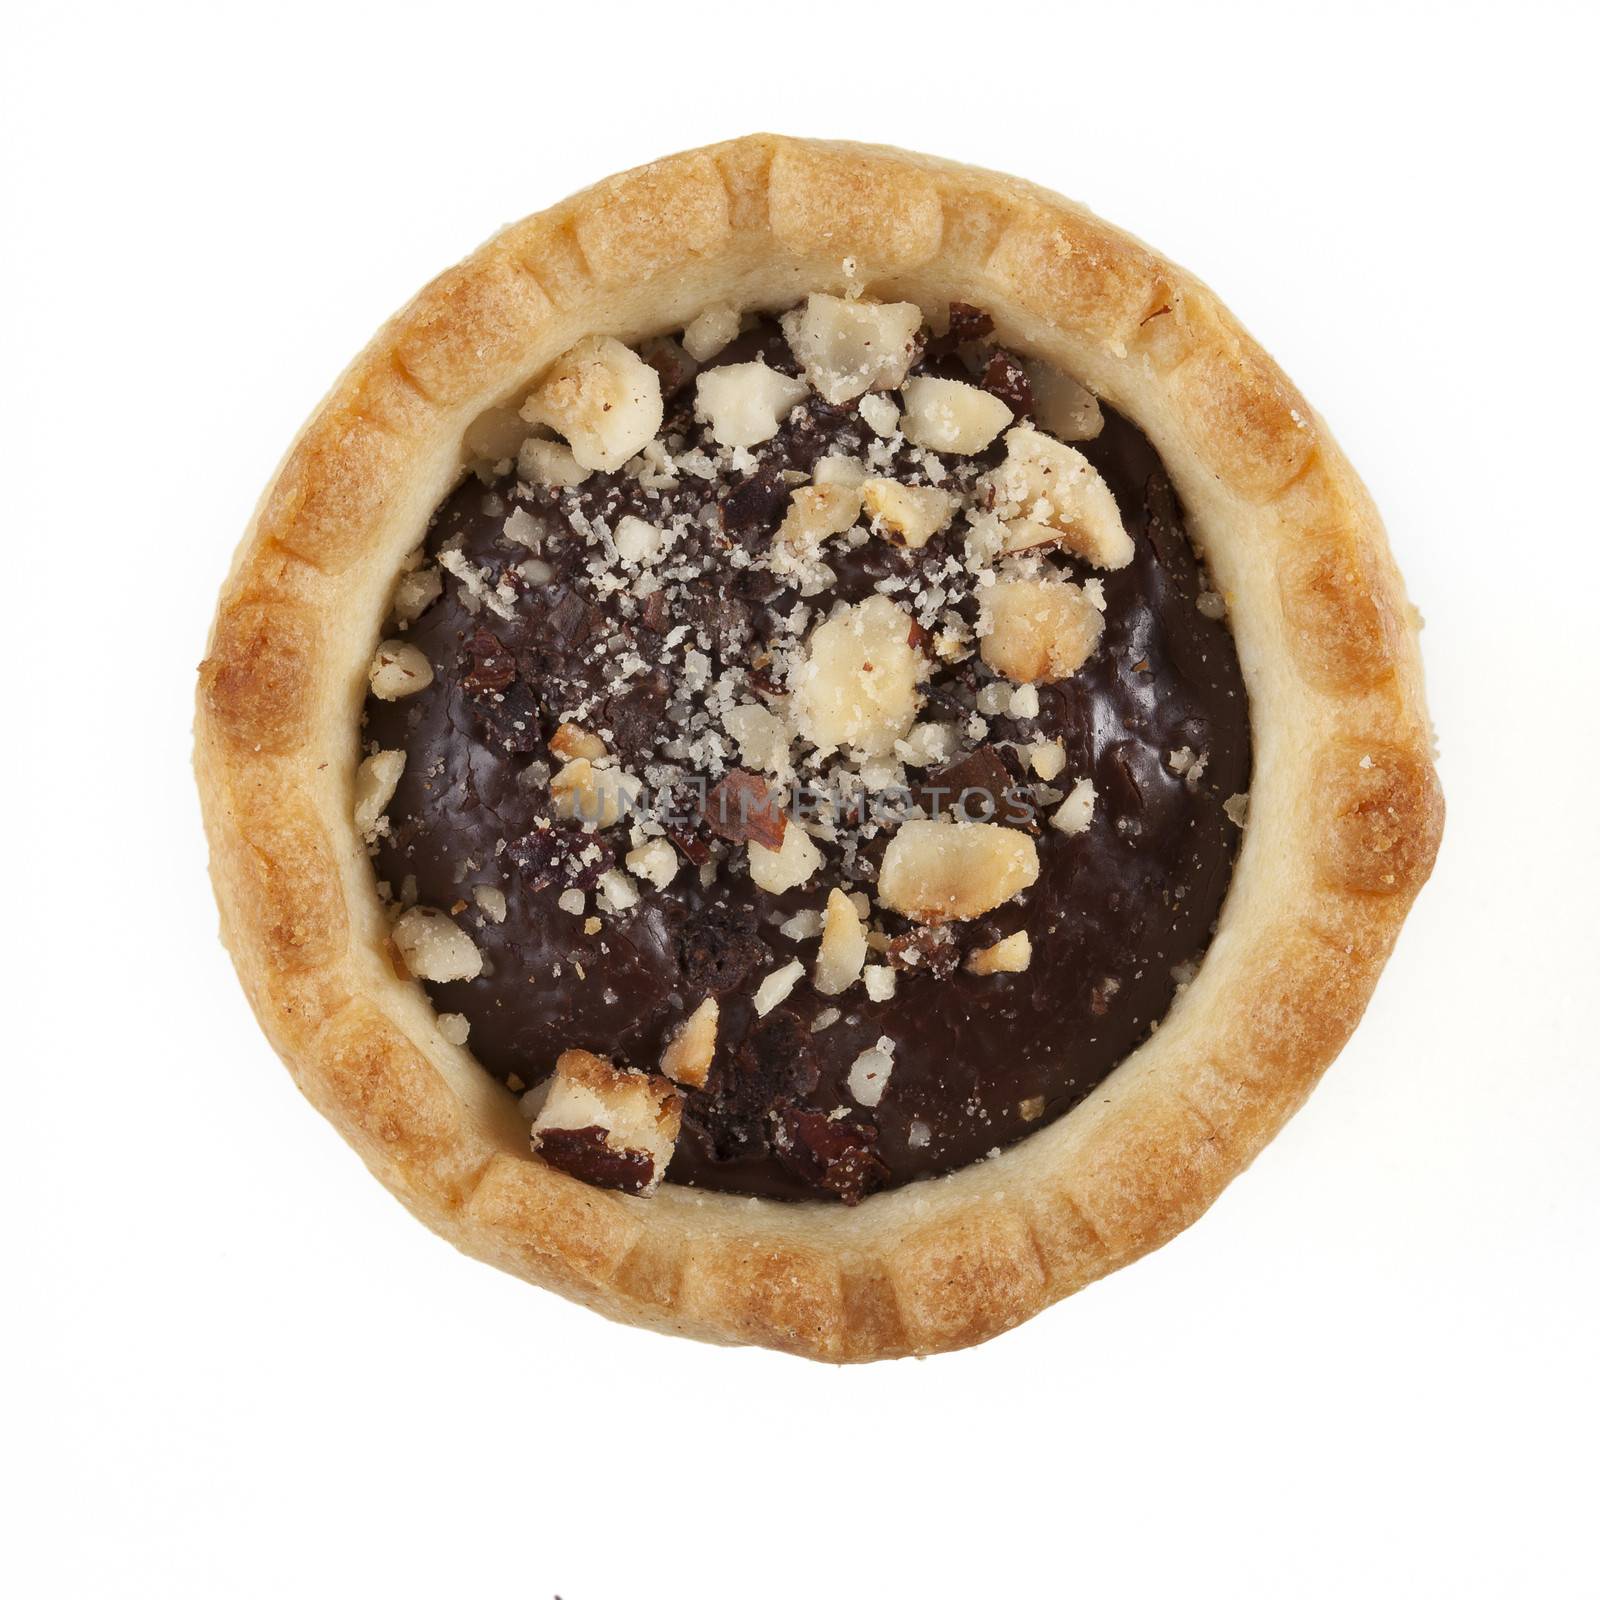 One chocolate tart sprinkled with chopped nuts on white background